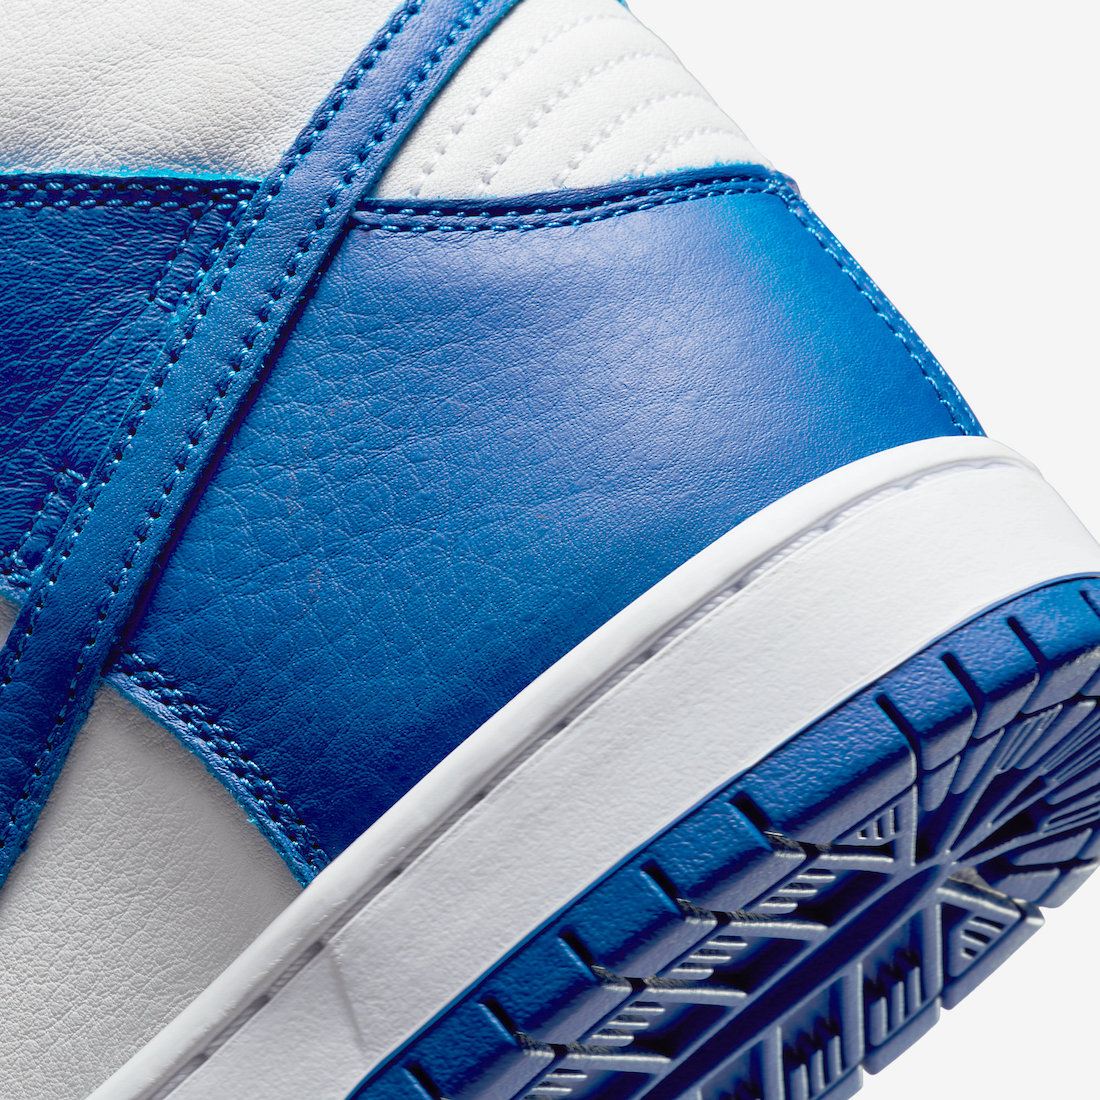 Nike SB Dunk High Pro ISO Kentucky Blue White DH7149 400 Release Date 7